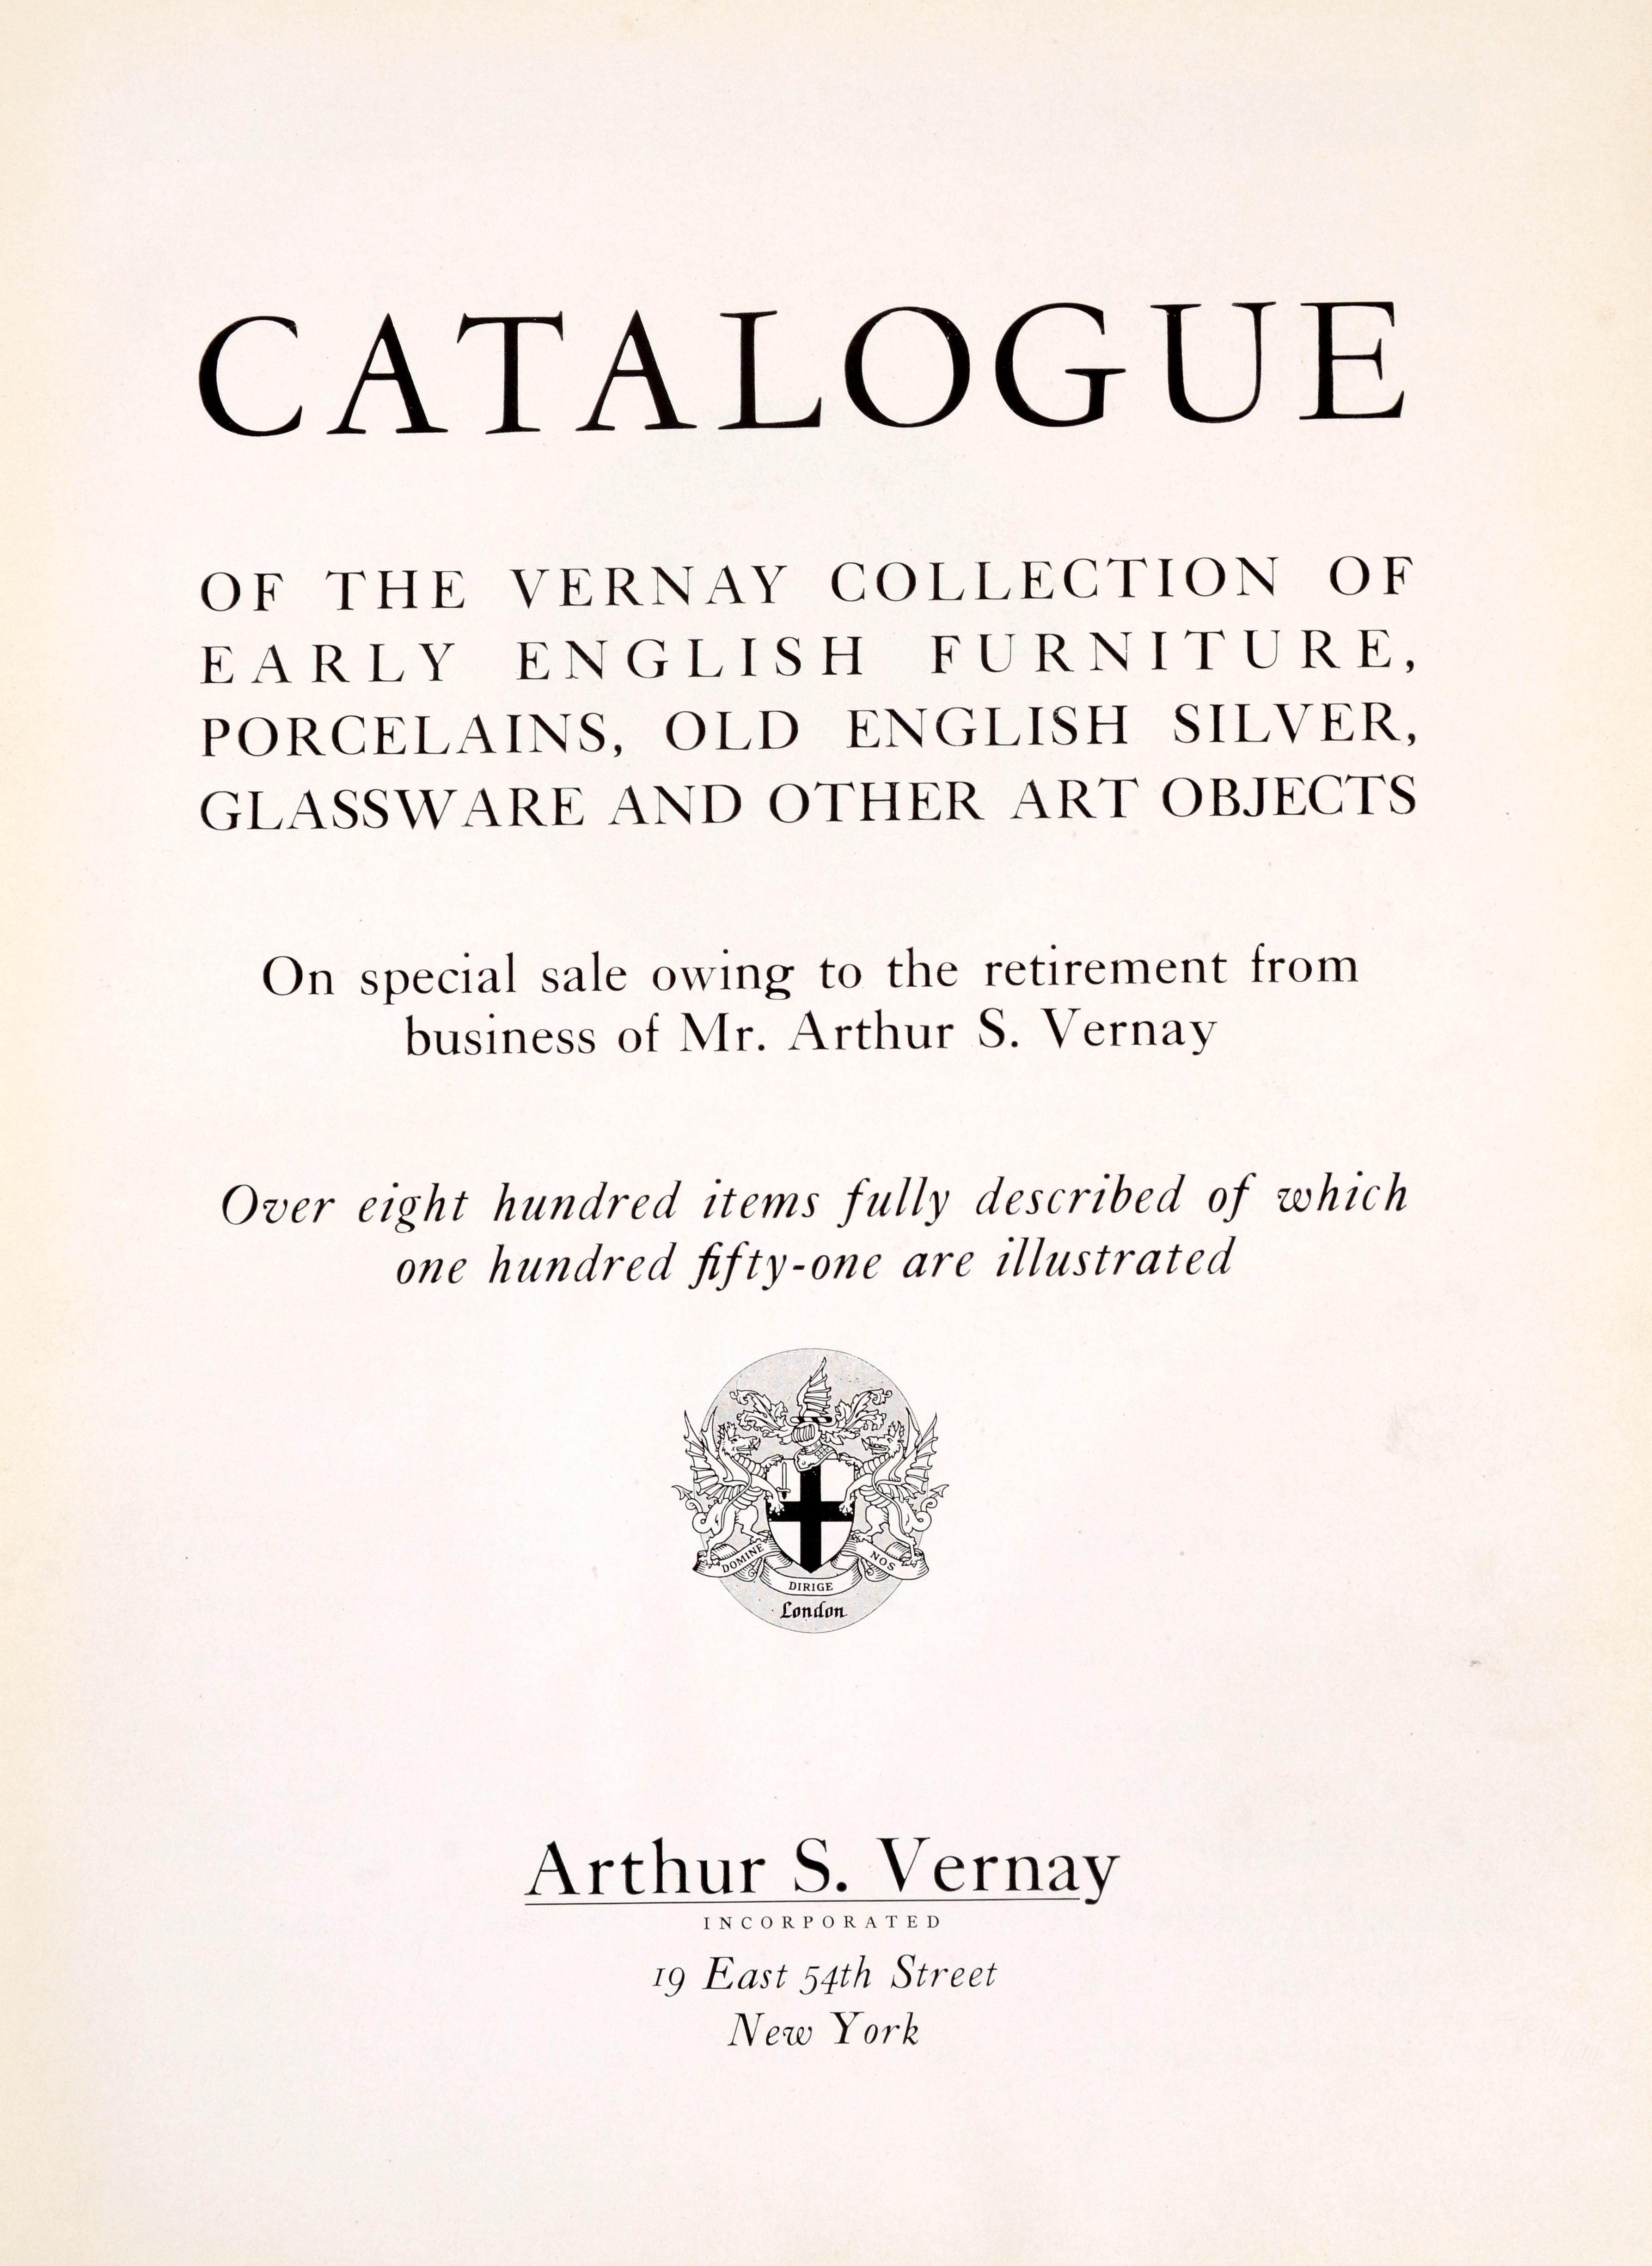 Catalogue of the Vernay Collection of Early English Furniture, Porcelains, Old English Silver, Glassware and Other Art Objects, 